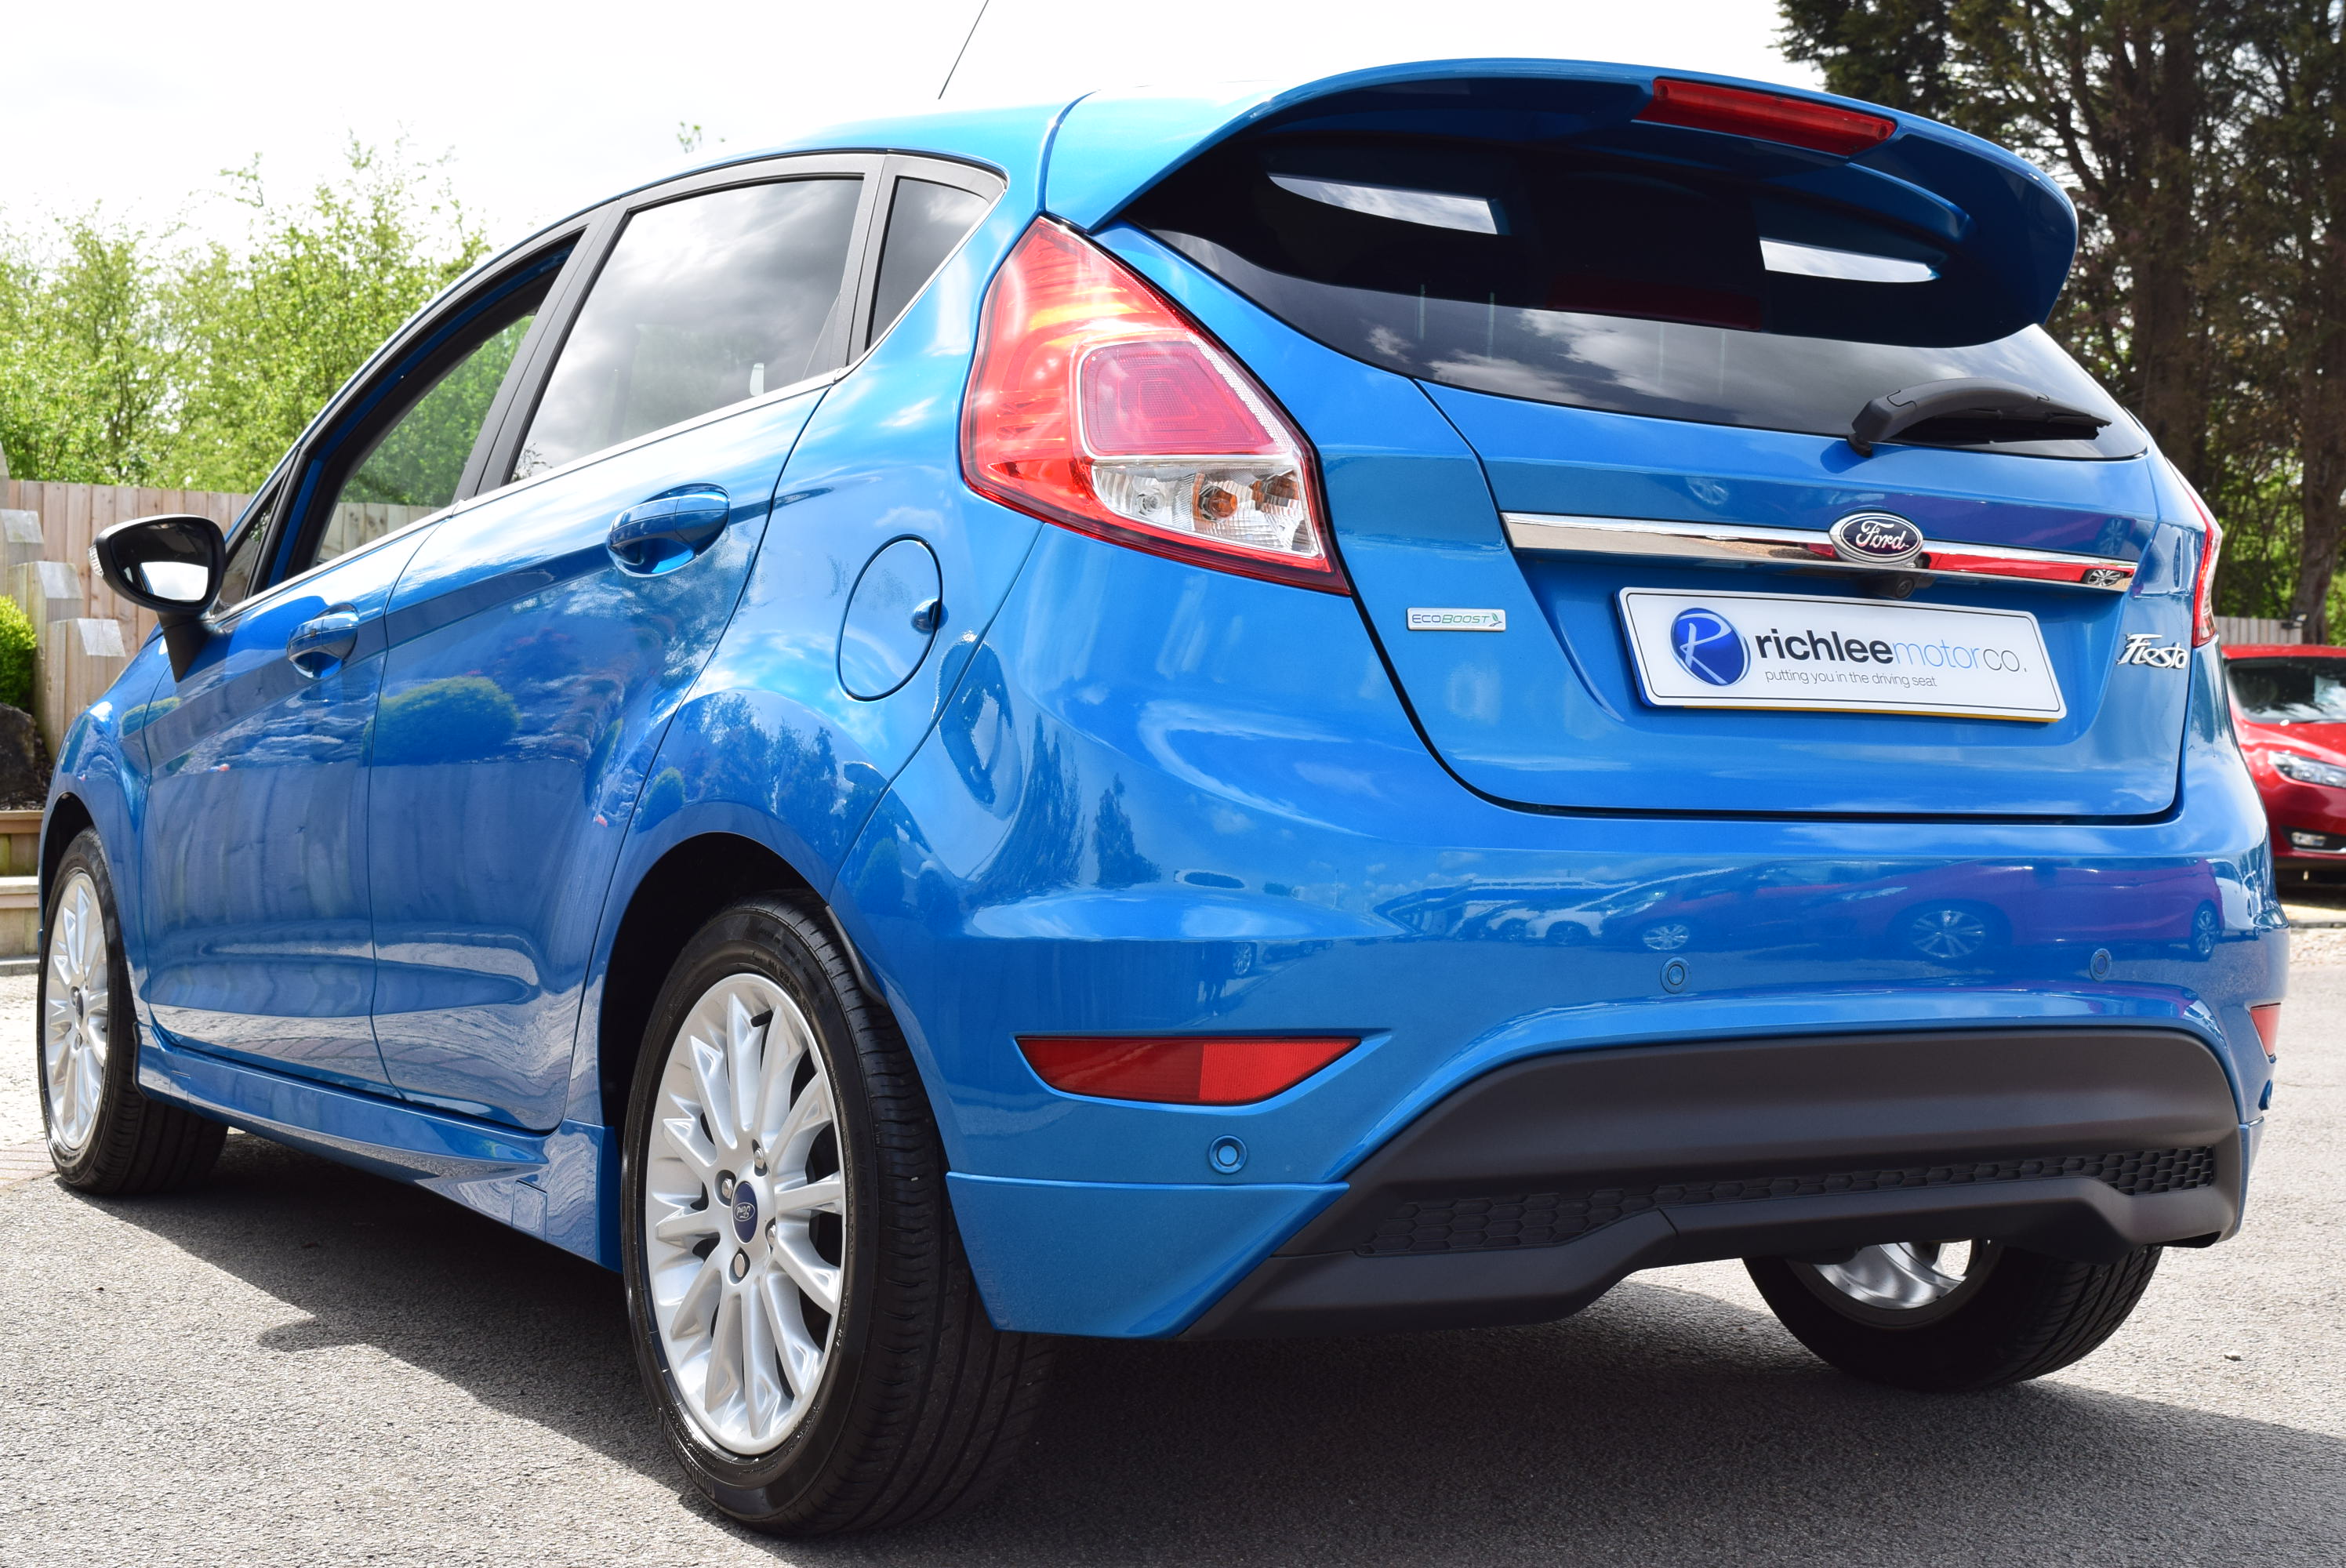 FORD FIESTA 1.0 EcoBoost 125 Titanium X 5dr For Sale